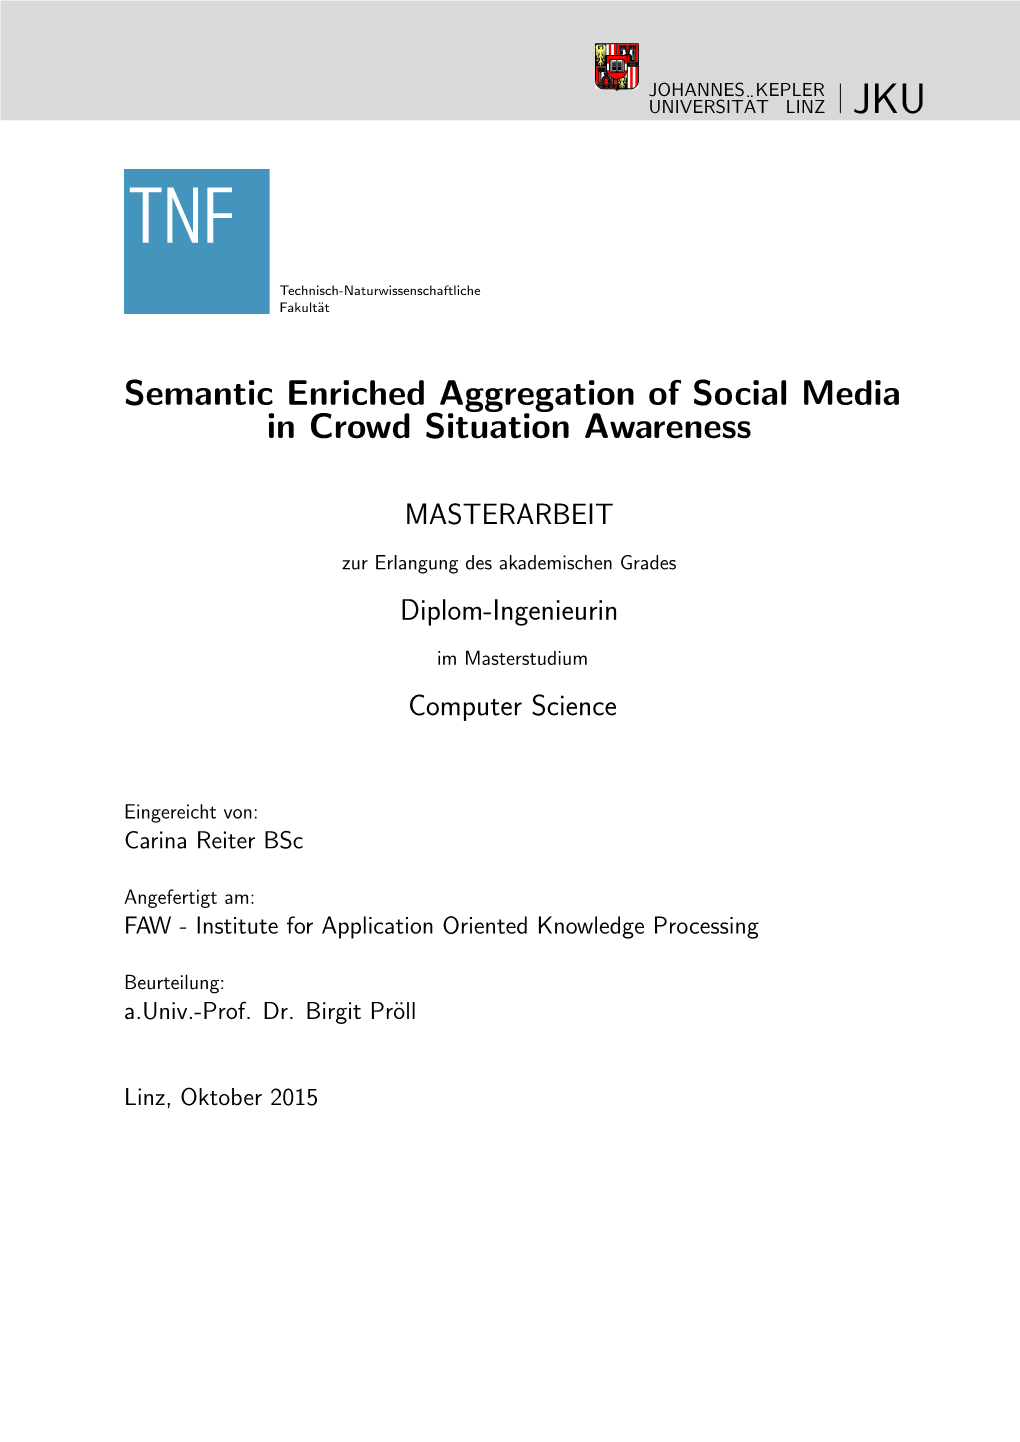 Semantic Enriched Aggregation of Social Media in Crowd Situation Awareness